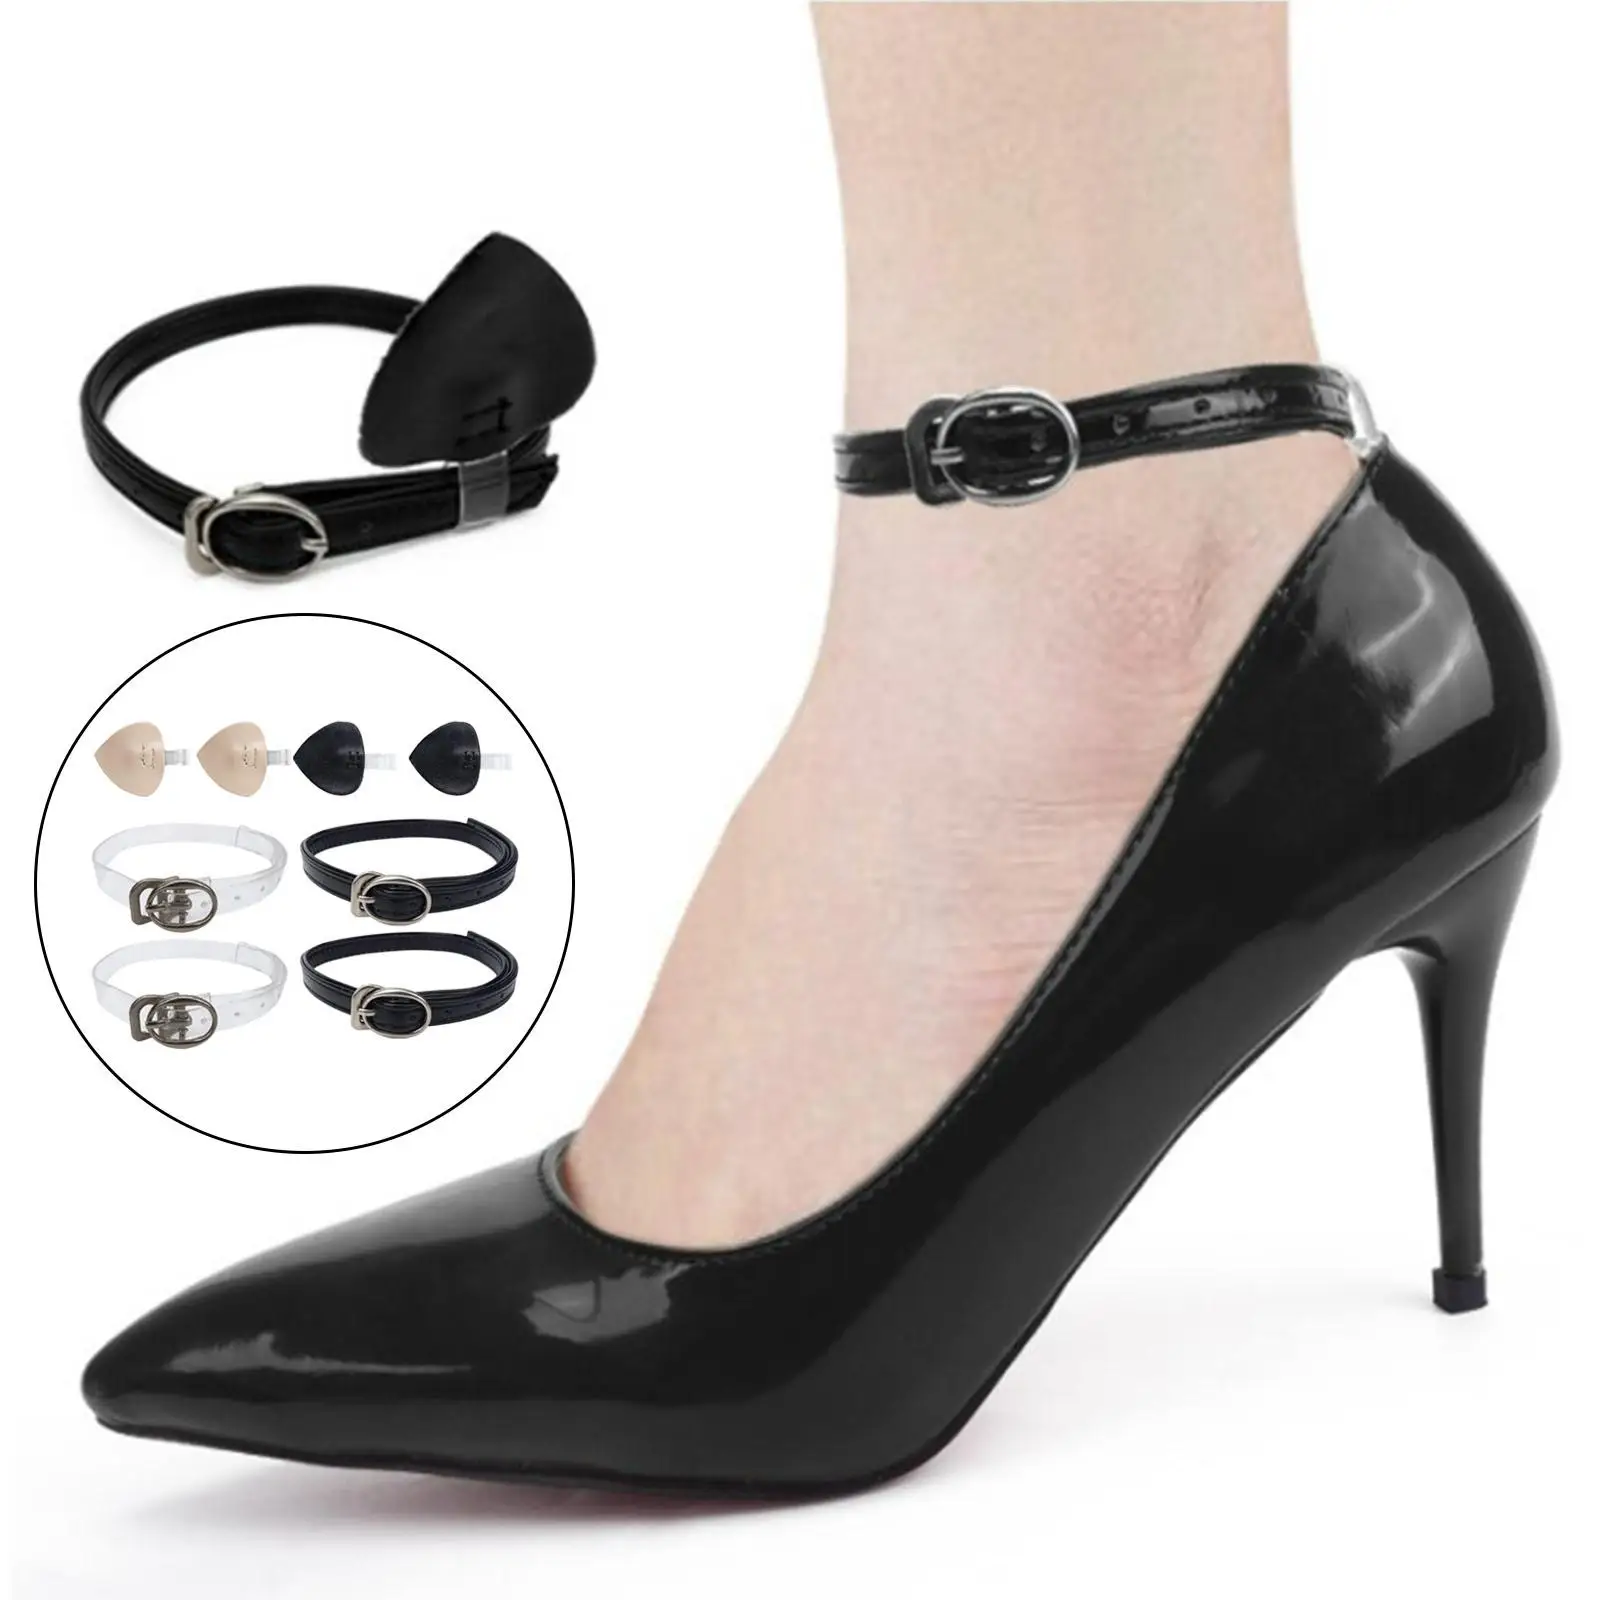 1 Pair Detachable High Heels Anti Slip Shoe Straps Anti-Skid Decor Band Ankle Shoelace Strap for Holding Loose High Heels Shoes